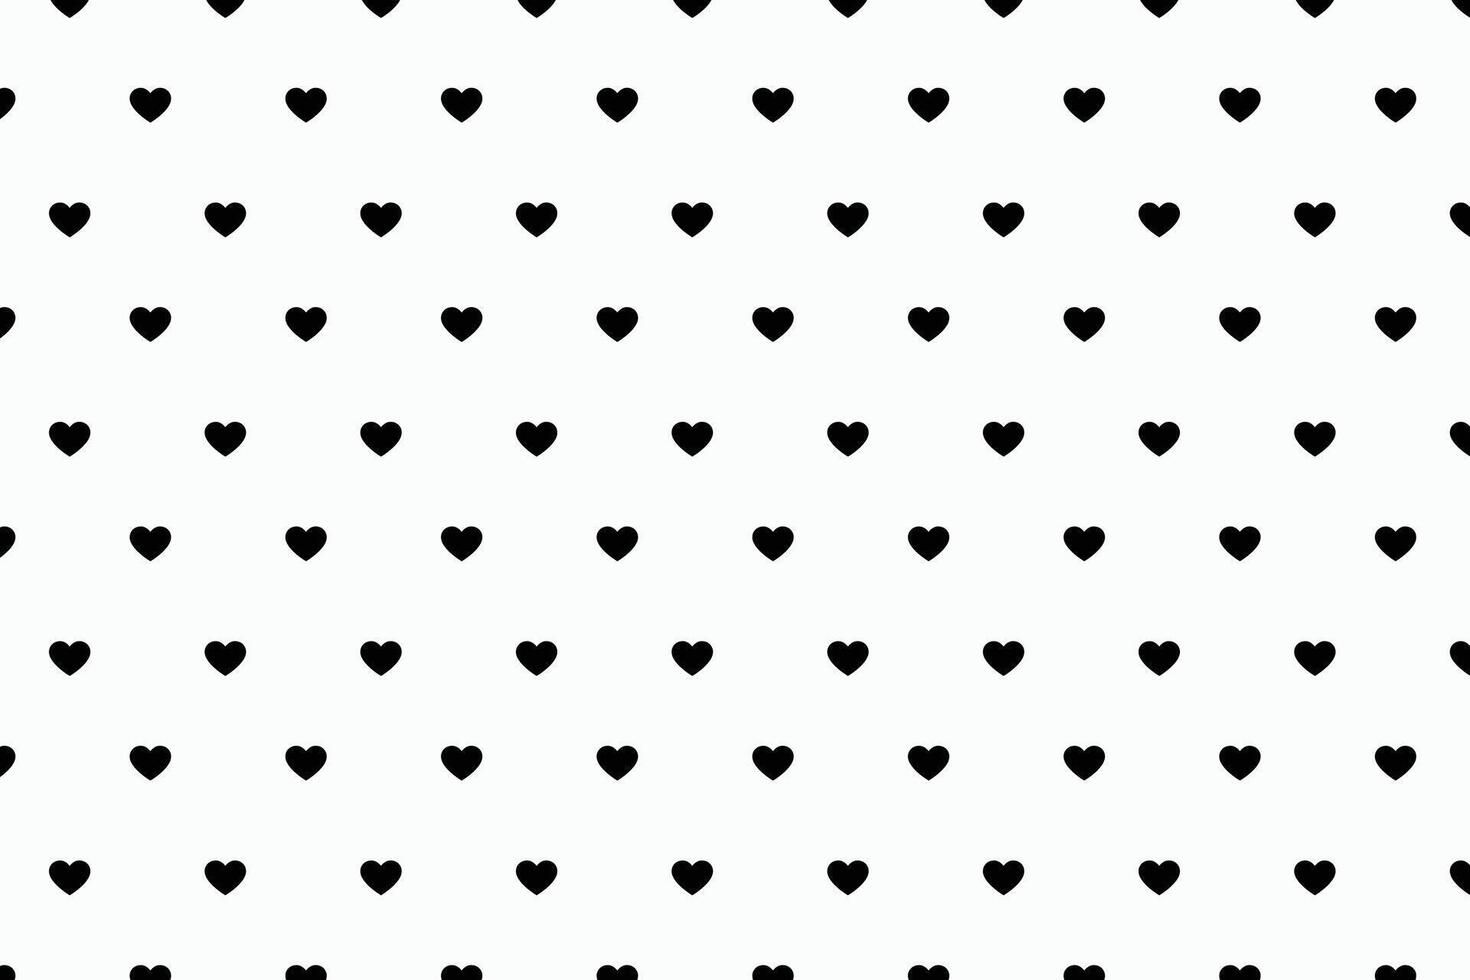 simple and cute romantic heart pattern for valentines cards vector